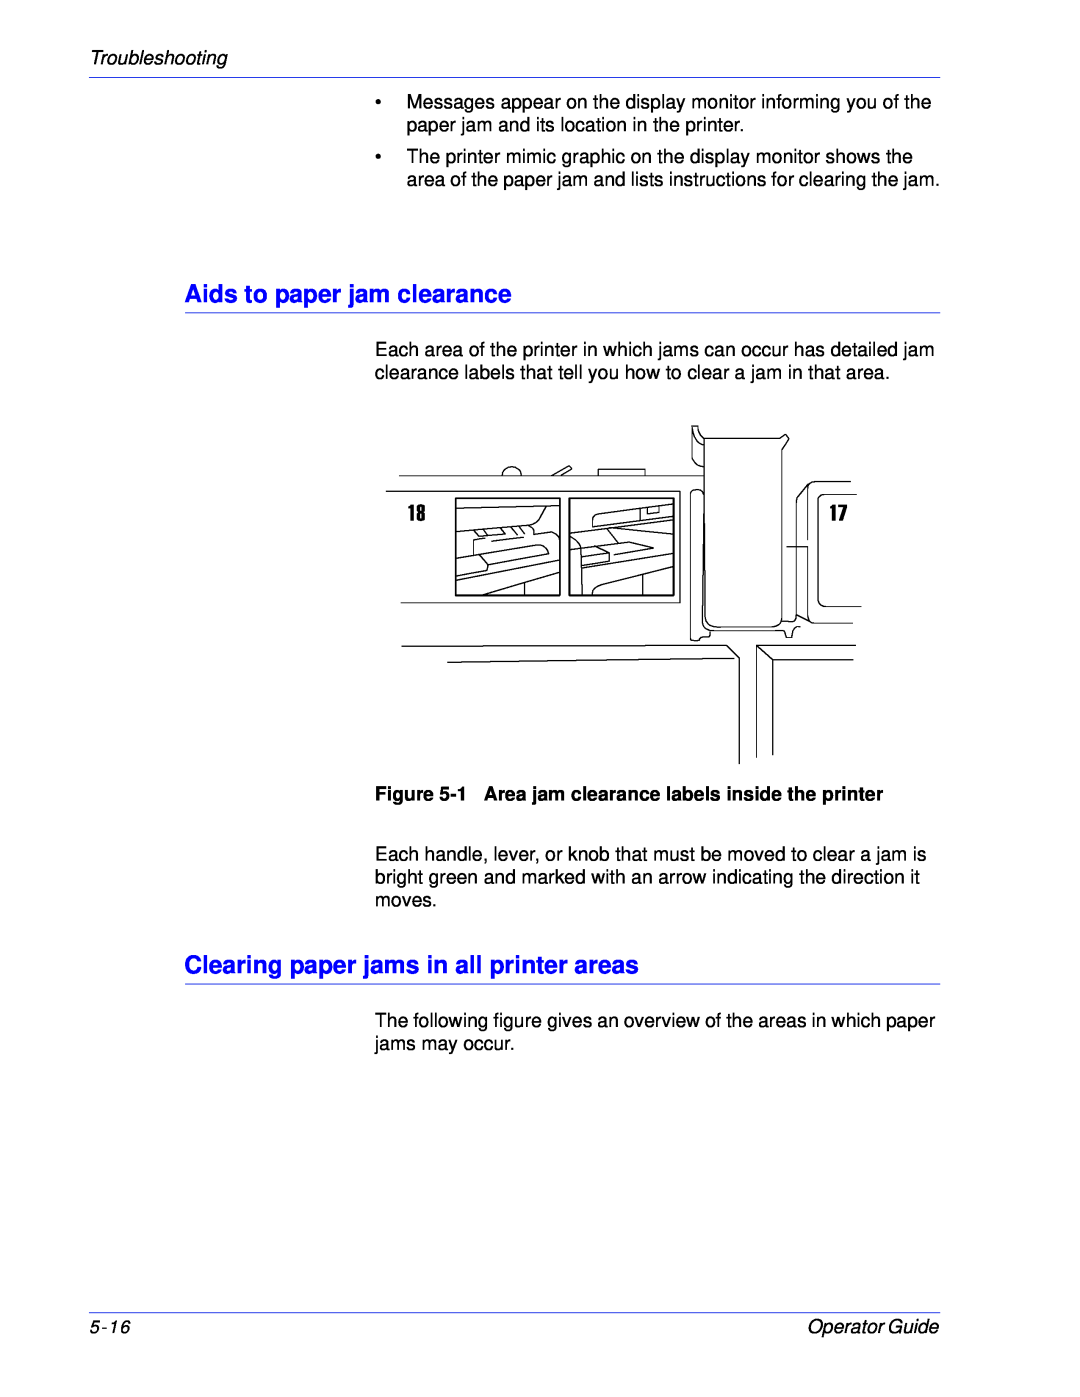 Xerox 100, 180 EPS manual Aids to paper jam clearance, Clearing paper jams in all printer areas, Troubleshooting 